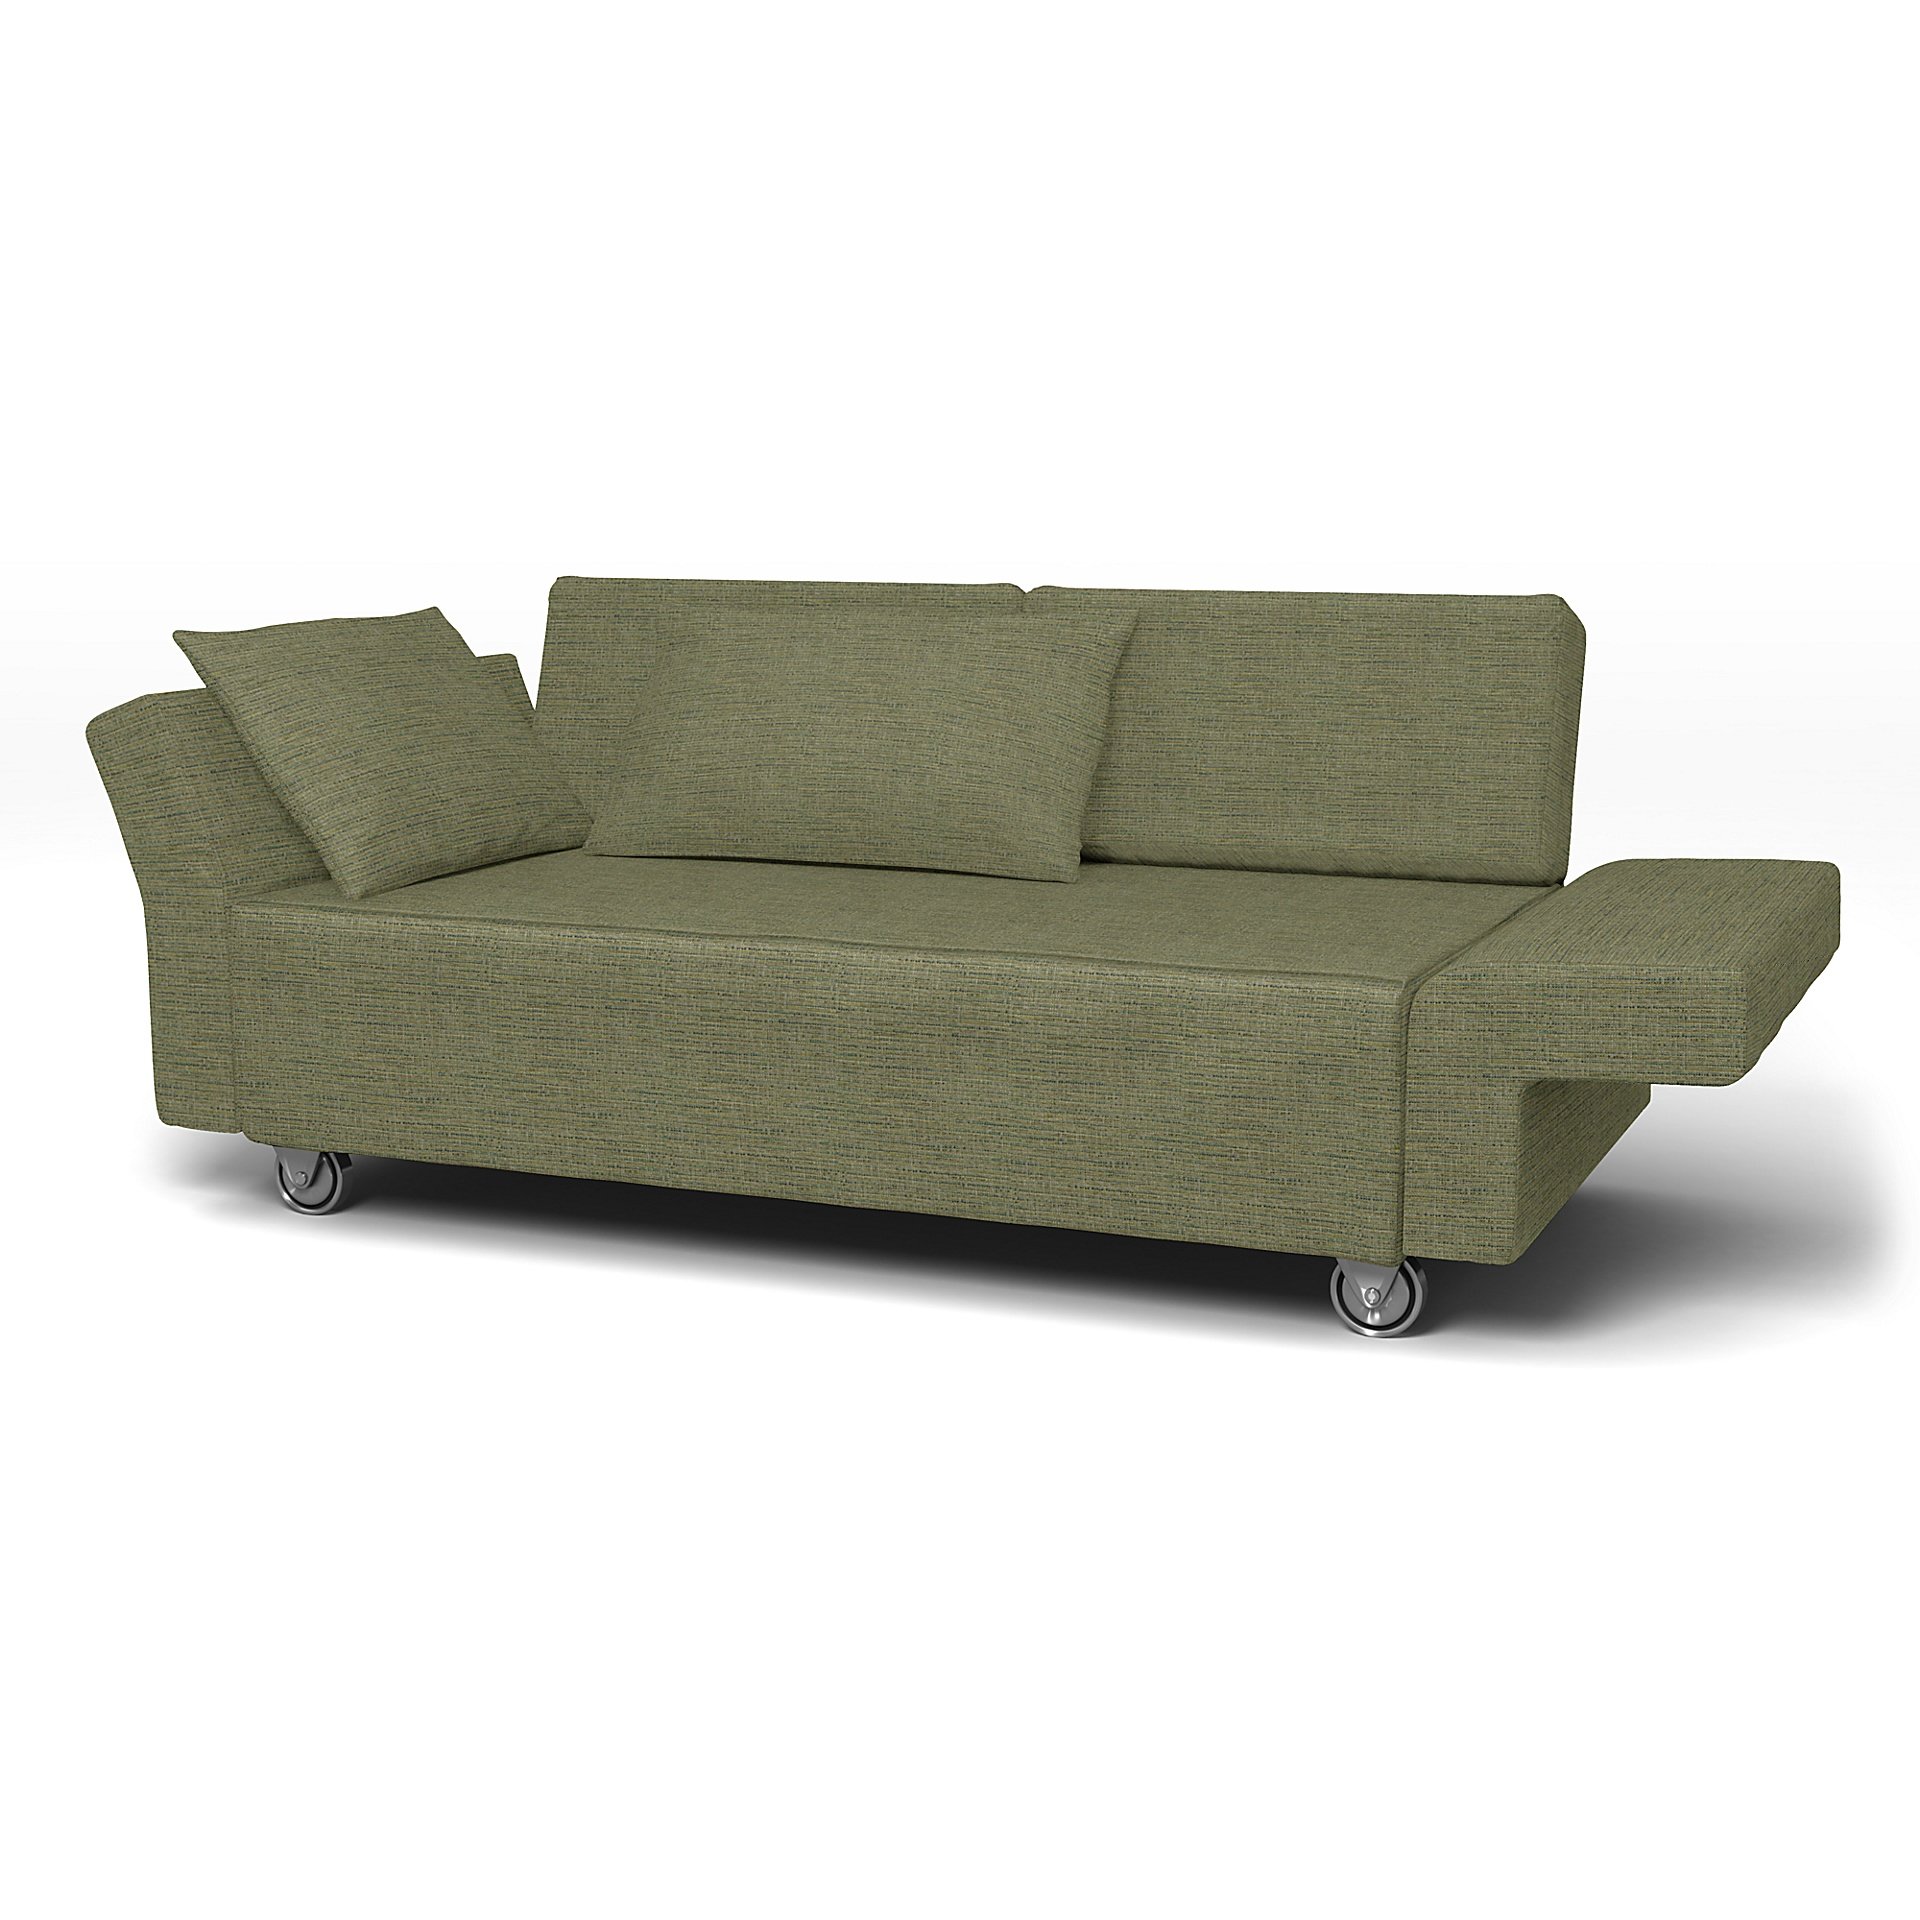 IKEA - Falsterbo 2 Seater Sofa Cover, Meadow Green, Boucle & Texture - Bemz